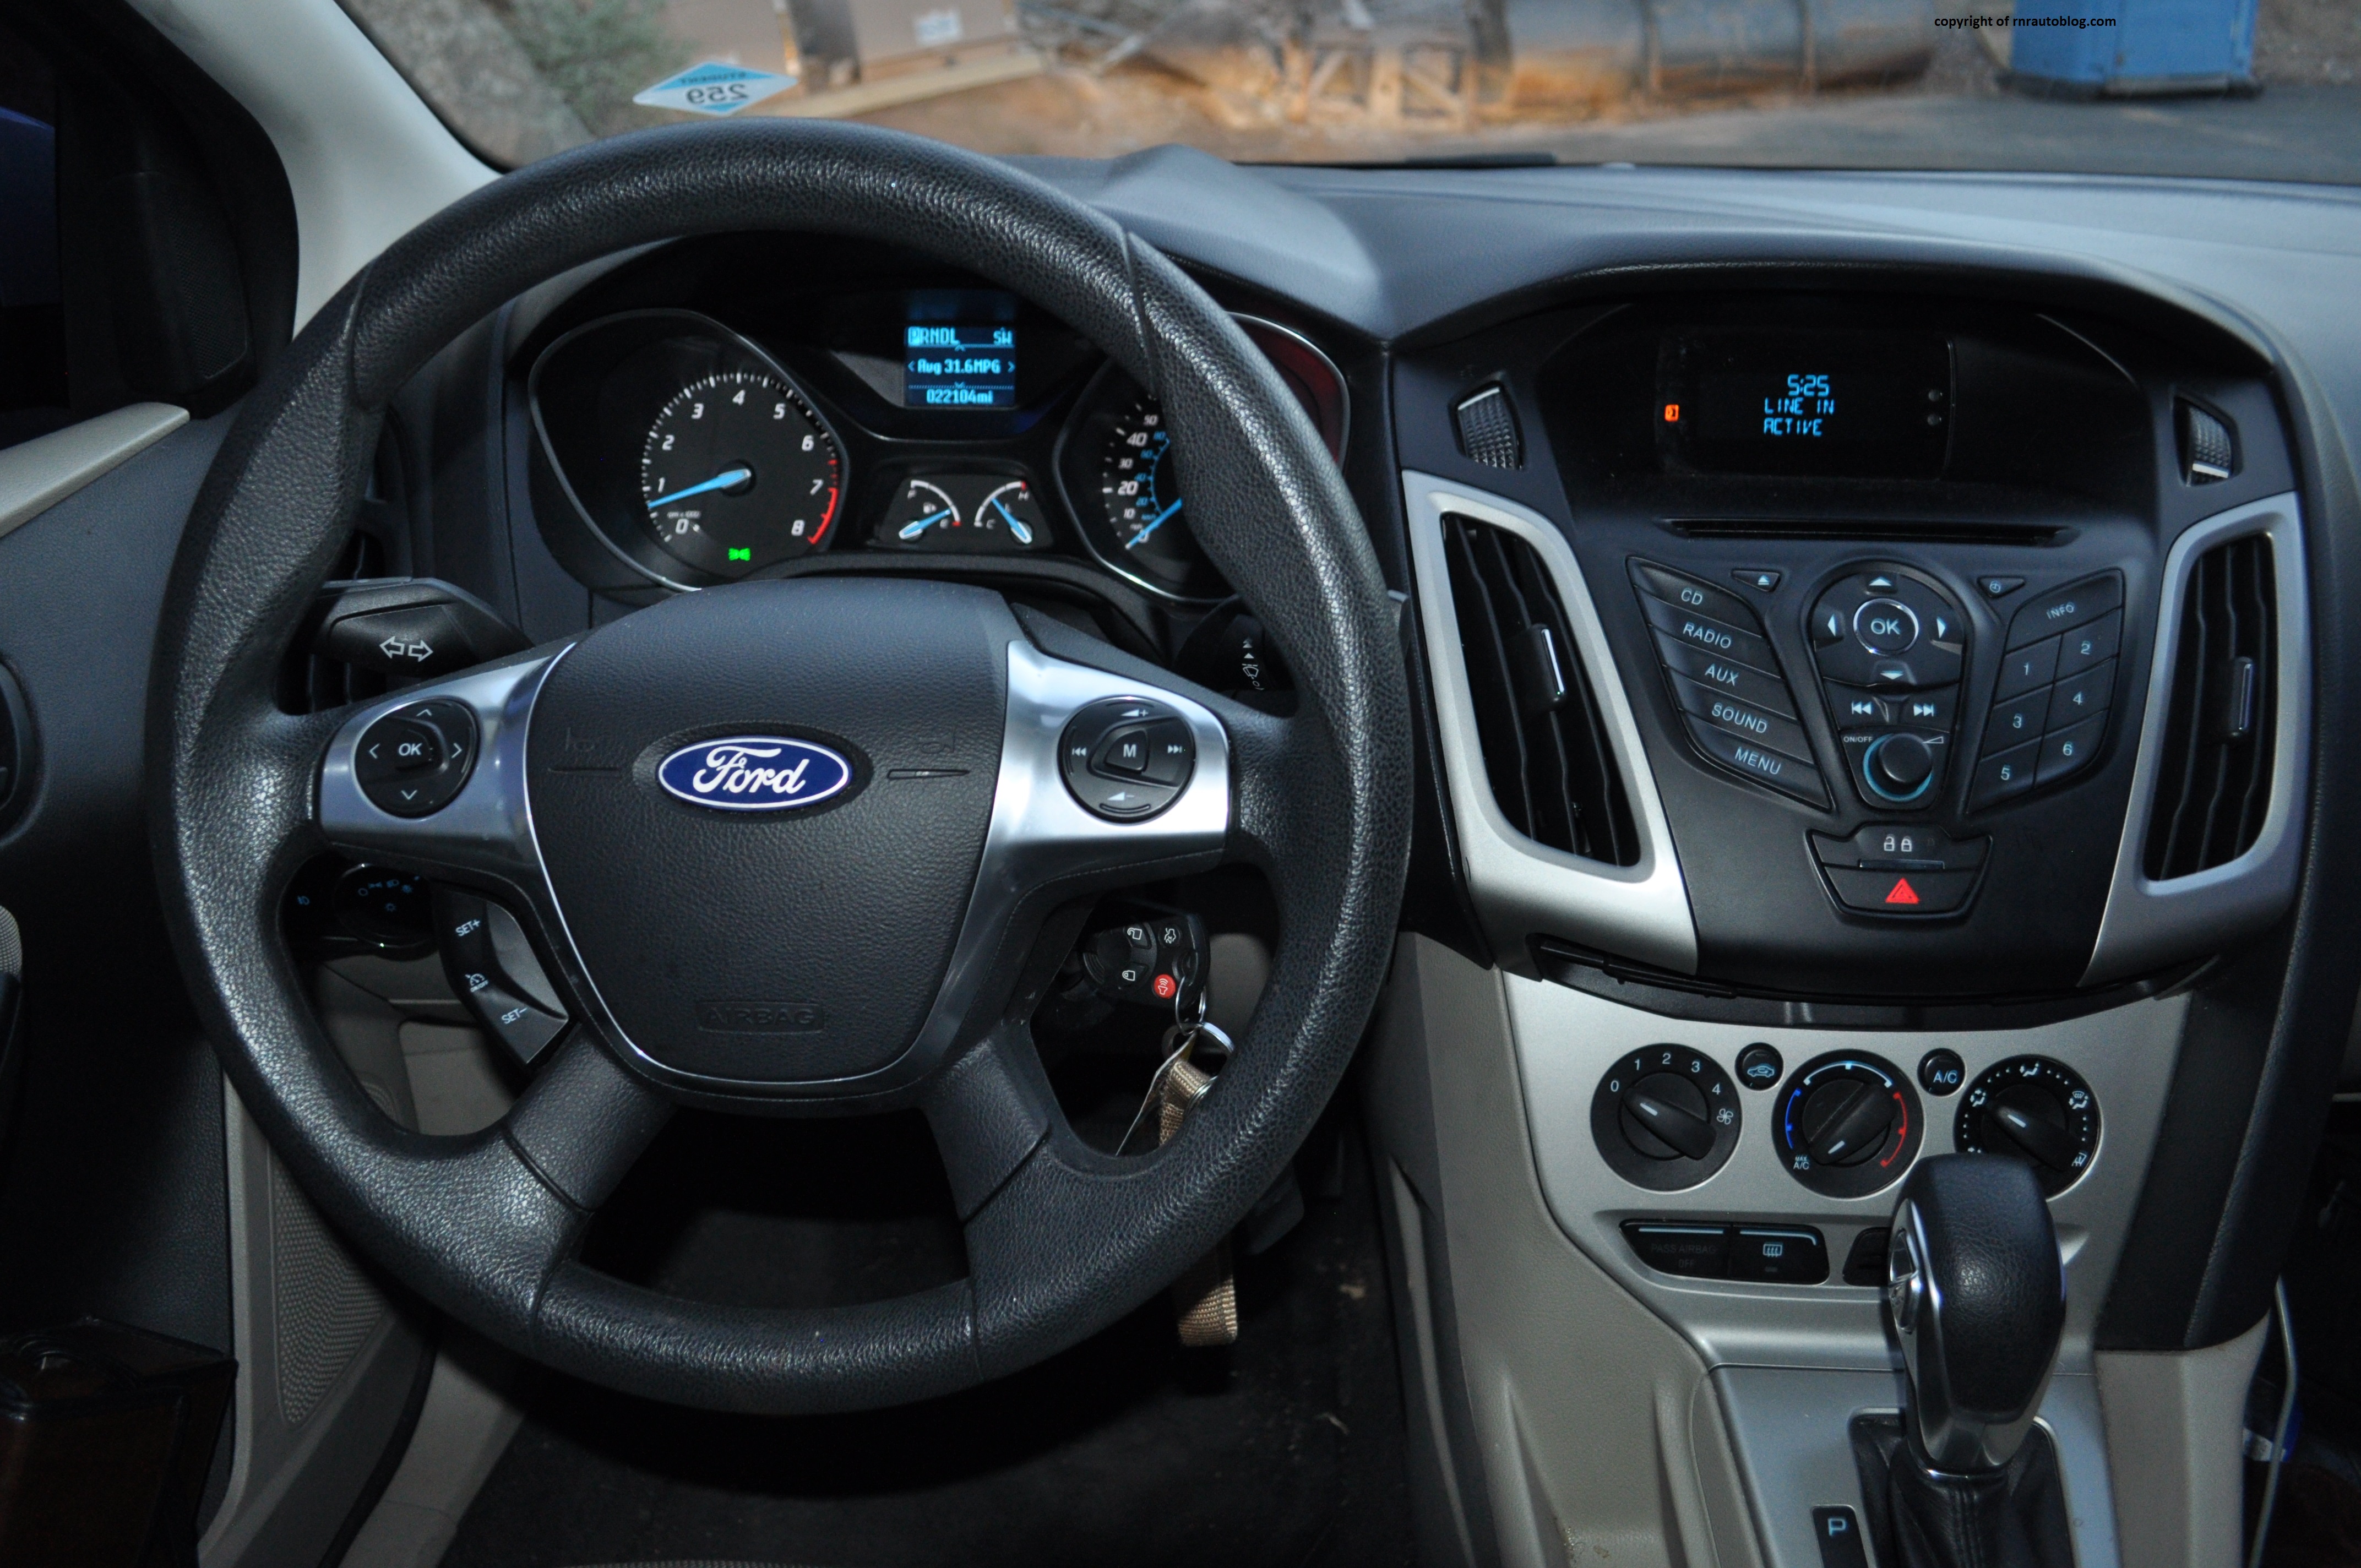 Ford focus transmission recall 2012 #6